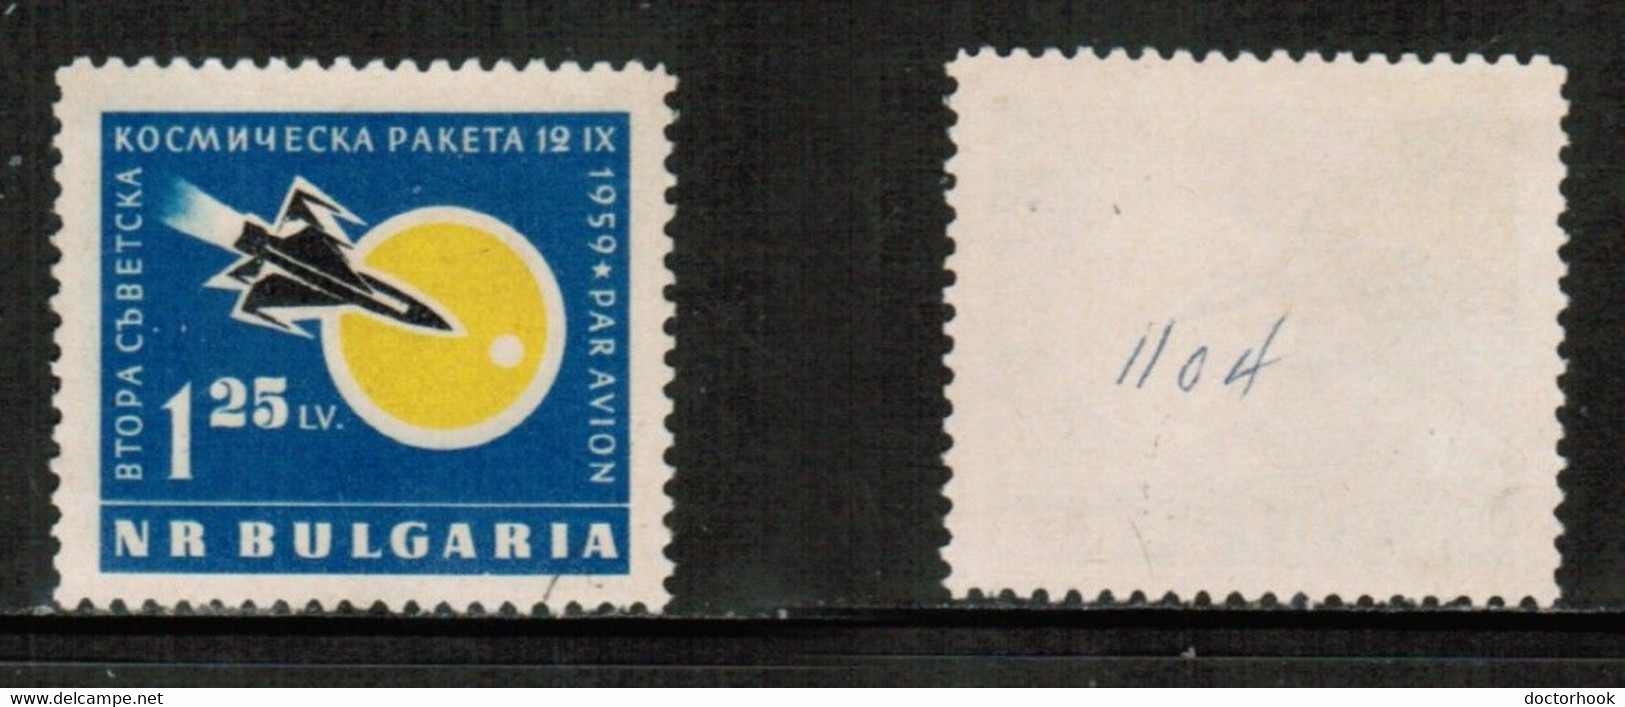 BULGARIA   Scott # C 79 USED (CONDITION AS PER SCAN) (Stamp Scan # 878-6) - Luchtpost